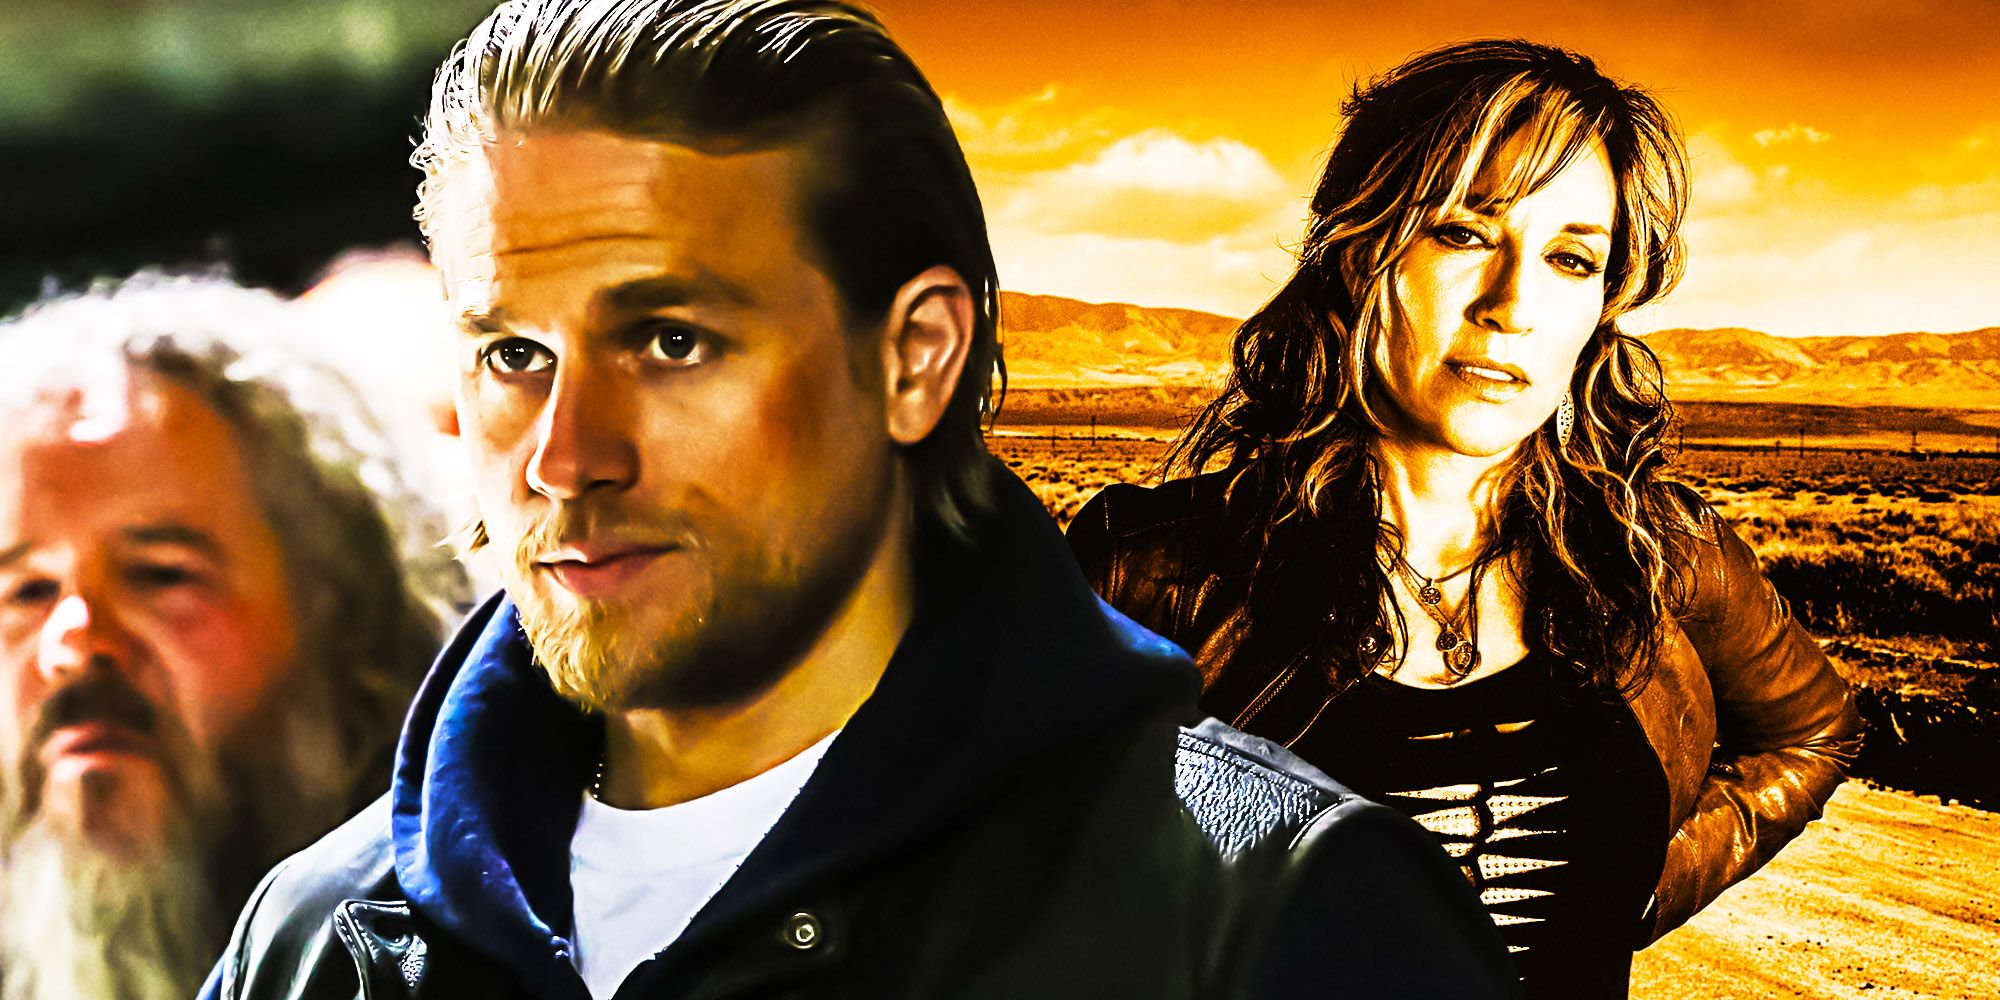 Sons of Anarchy' Ends As A Macho Soap Opera Often Anchored By